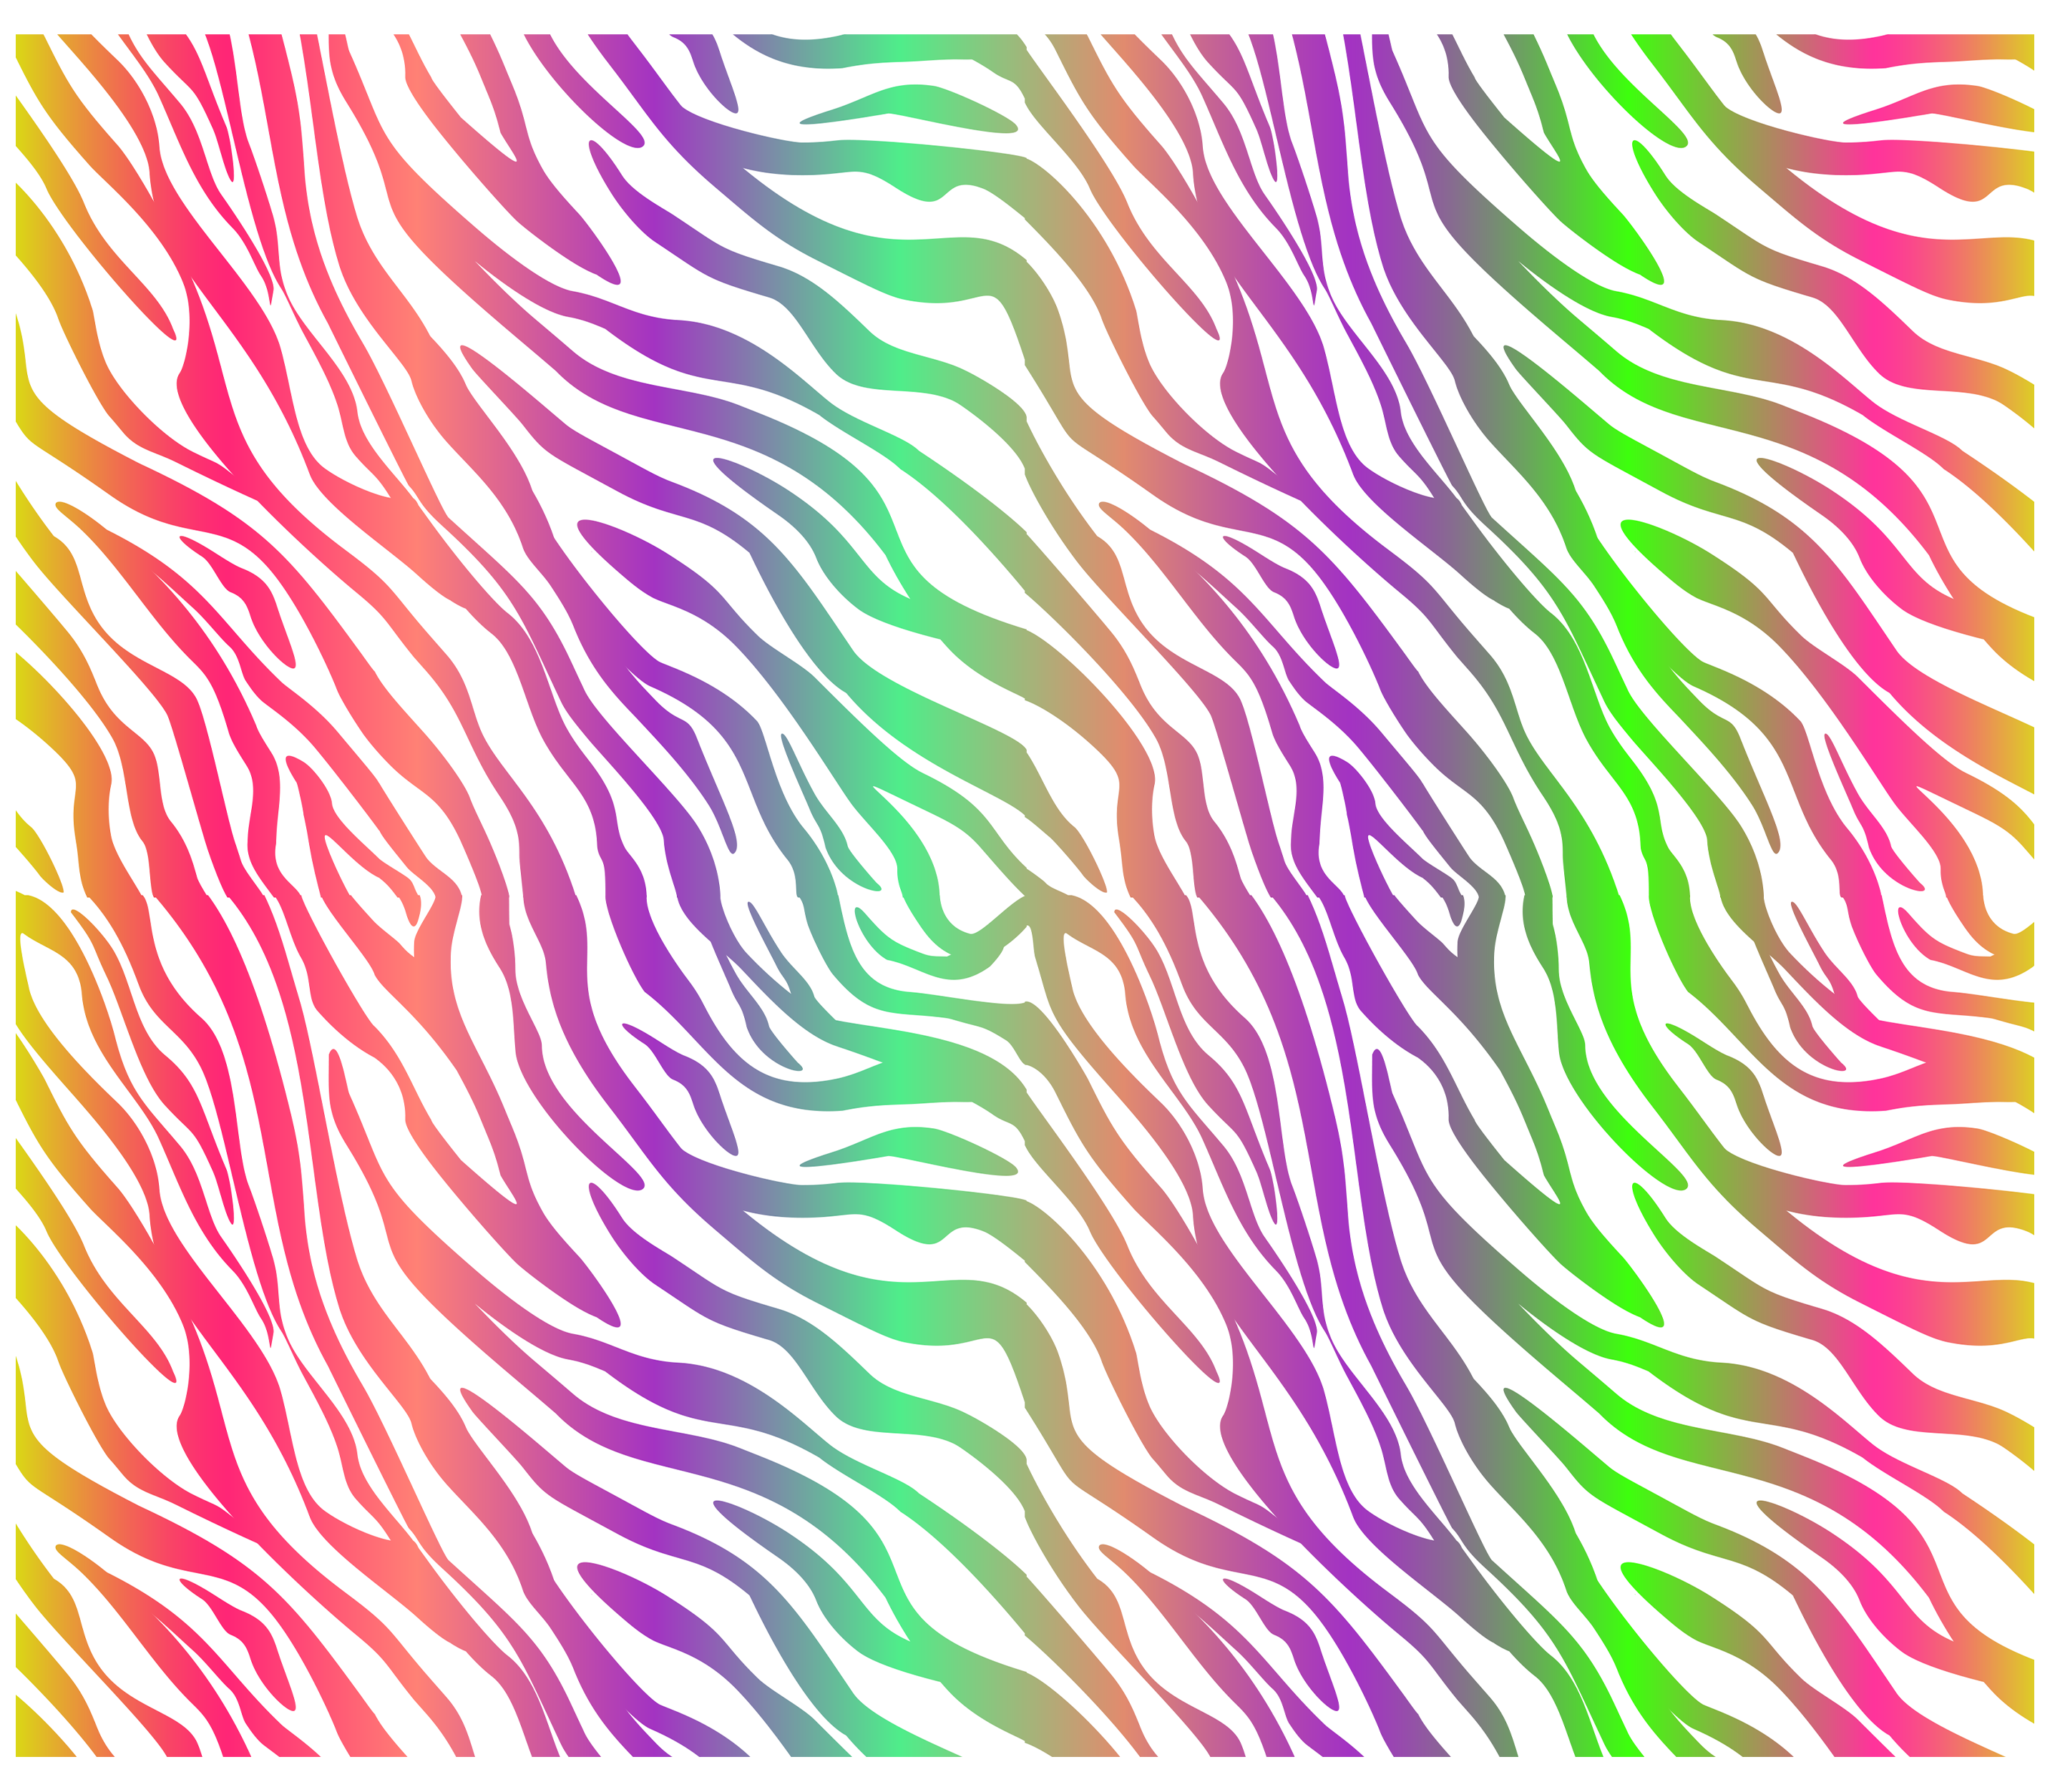 neon green and pink zebra print backgrounds